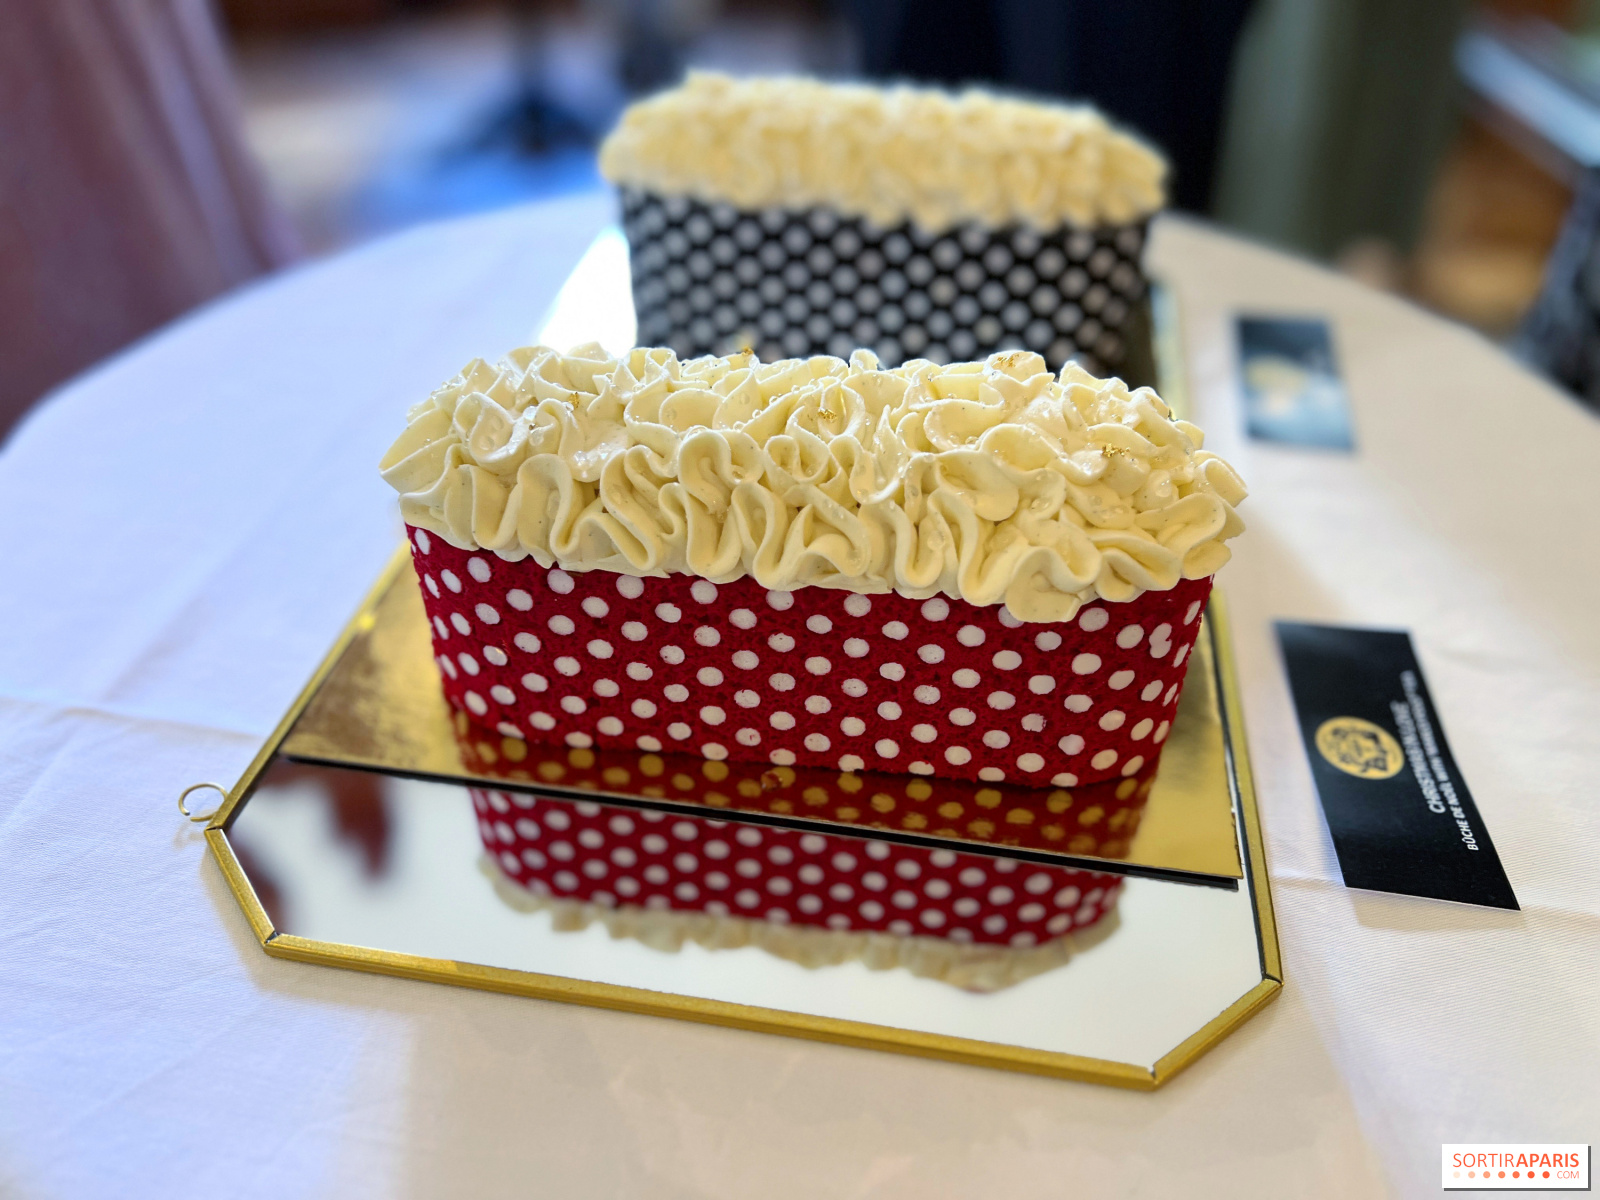 Mariage Frères launches their first Christmas teatime in Paris